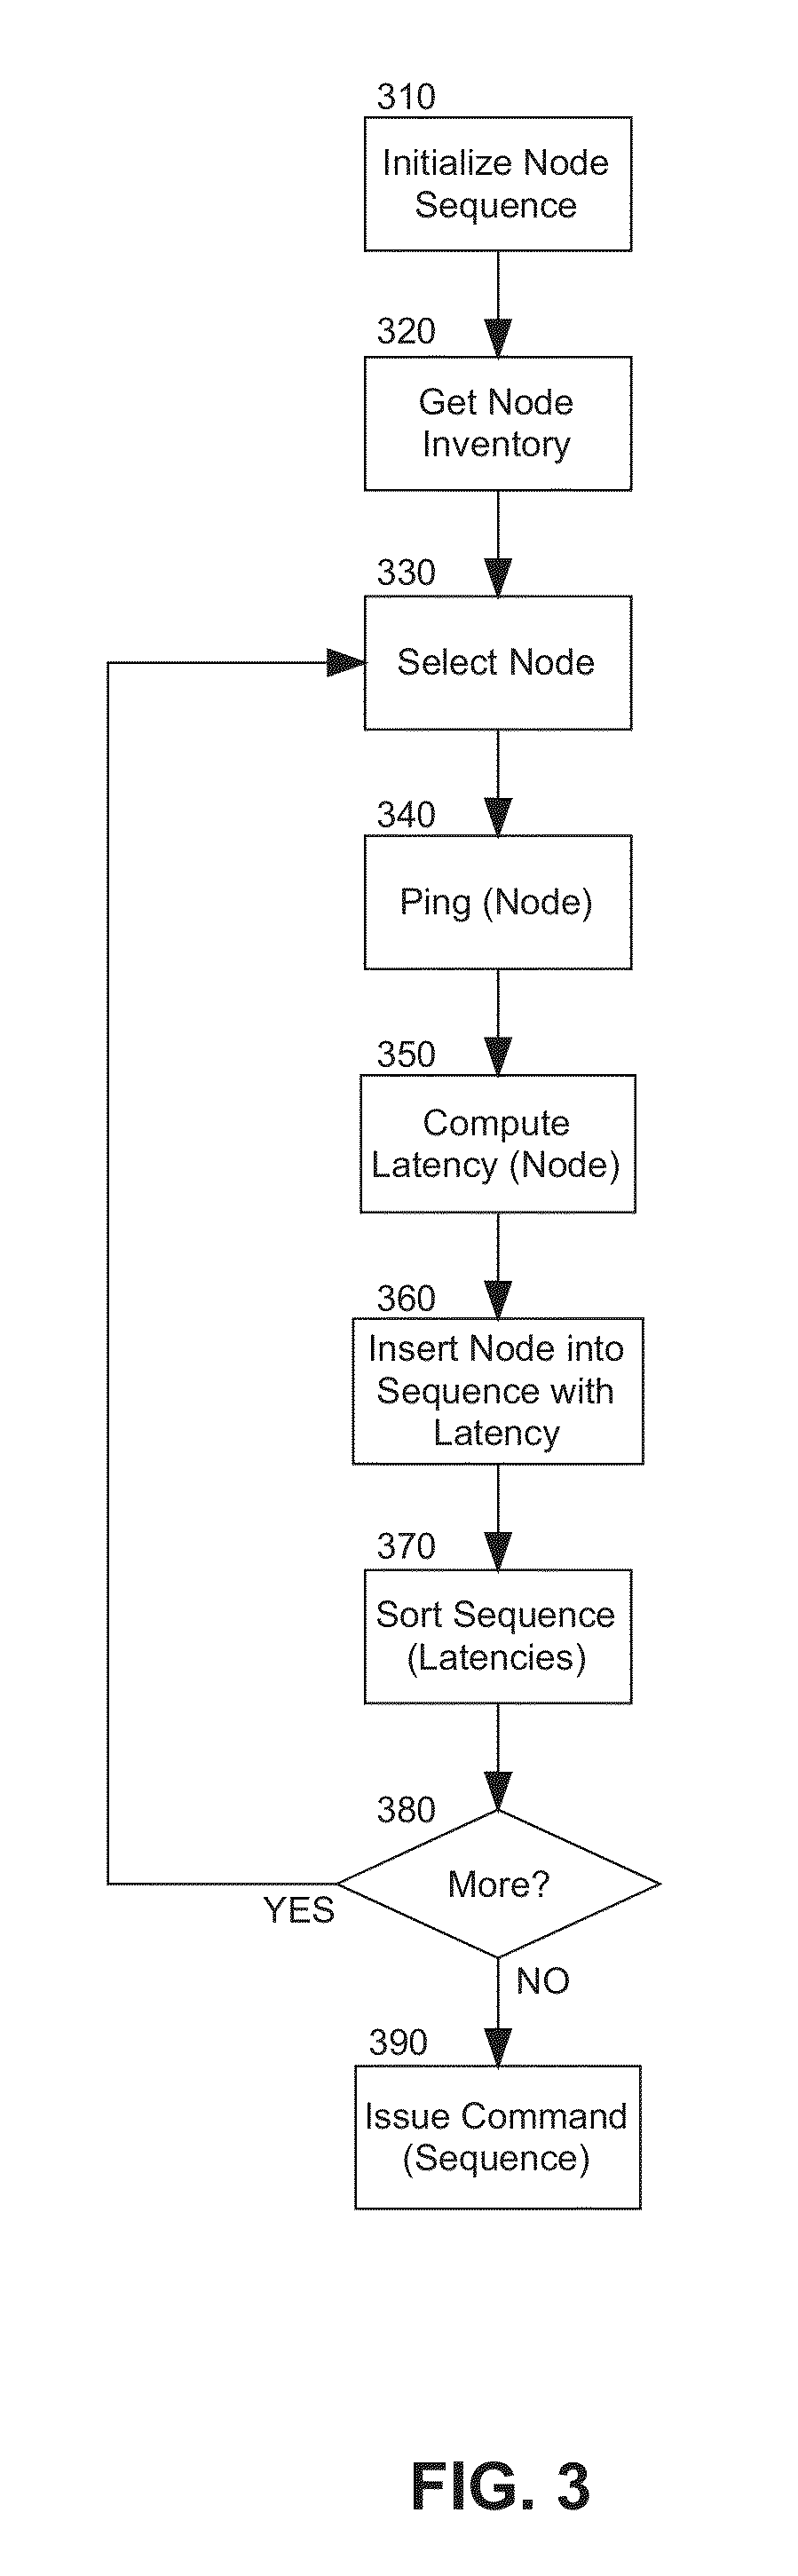 Dynamic optimization of command issuance in a computing cluster